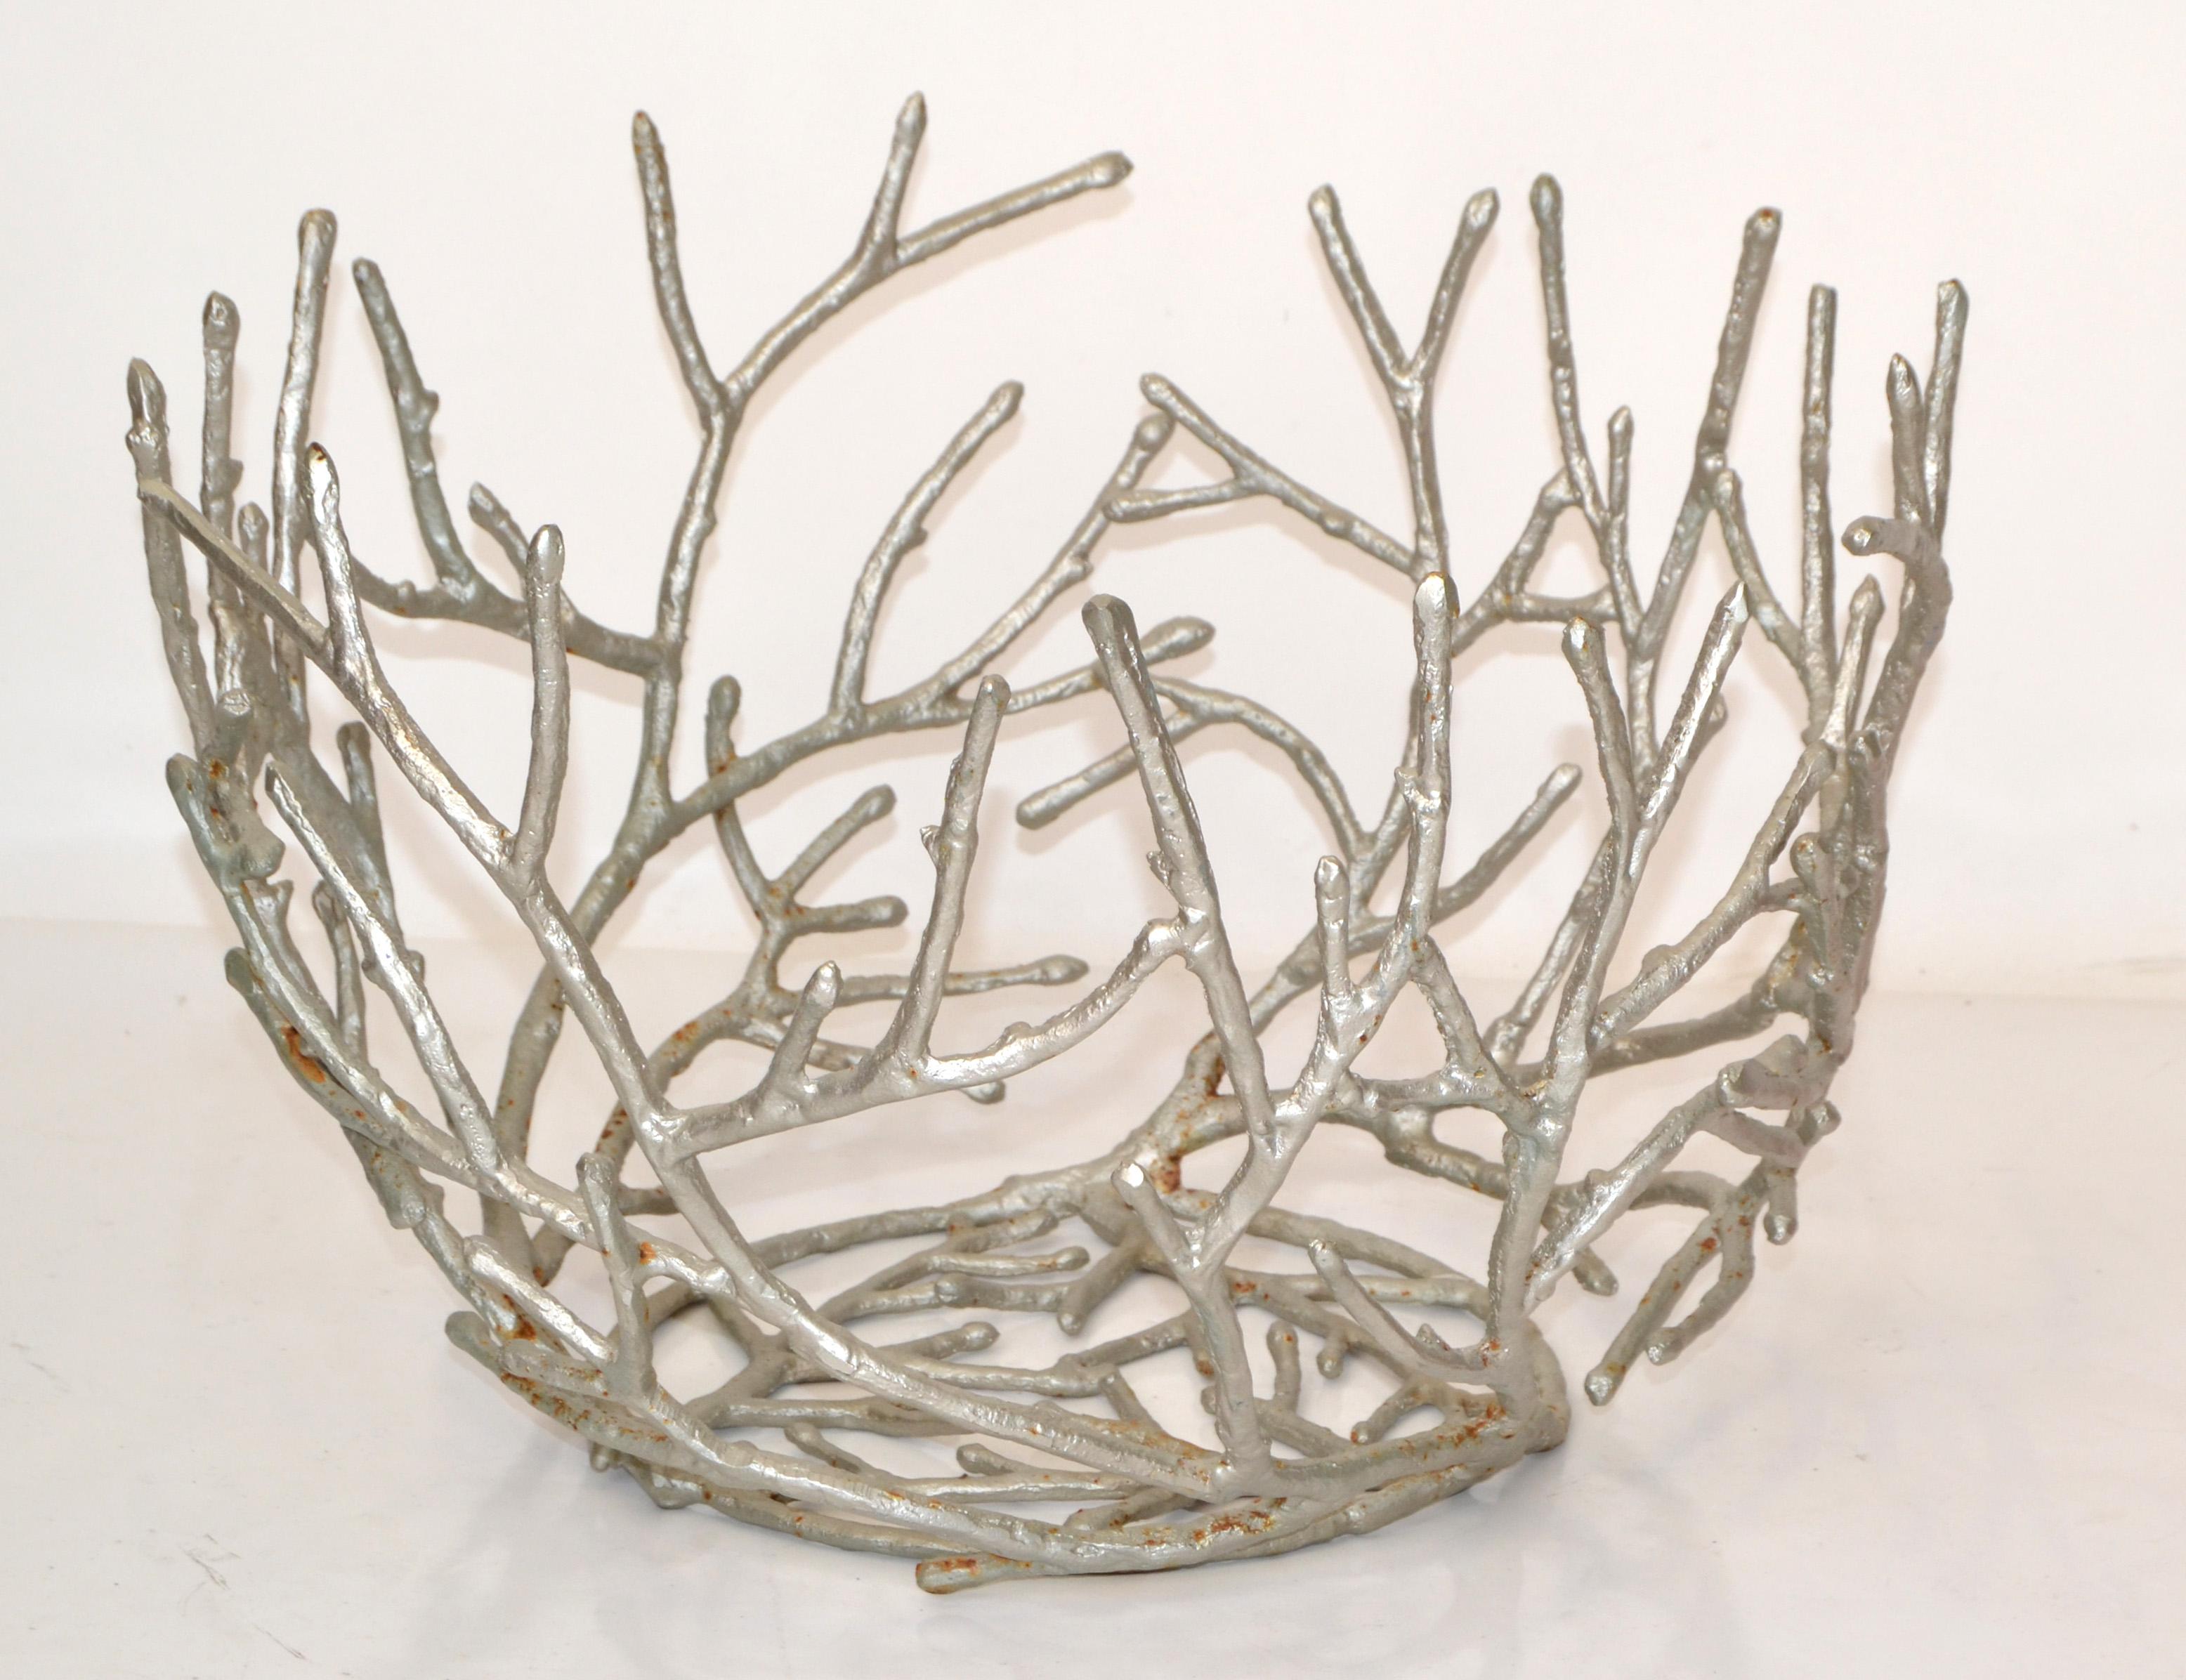 Inspired by nature this large bowl or outdoor planter in coral shape or twig leaves made out of aluminum and coated in silver paint.
The sculptural Design fits to any Mid-Century Modern interior and is made to last.
In fair vintage condition due